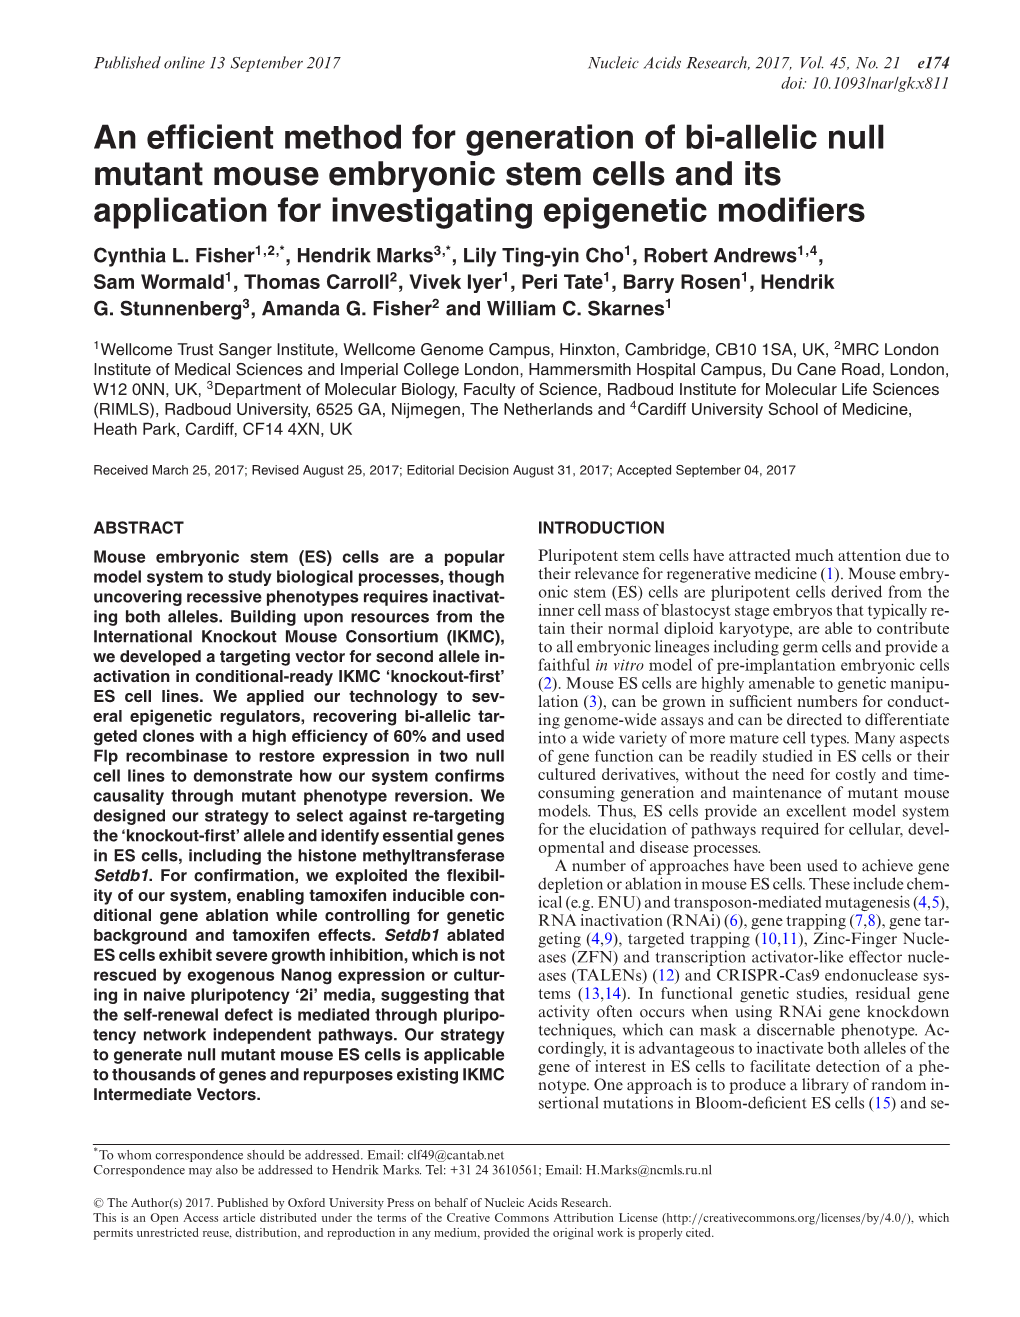 An Efficient Method for Generation of Bi-Allelic Null Mutant Mouse Embryonic Stem Cells and Its Application for Investigating Epigenetic Modifiers